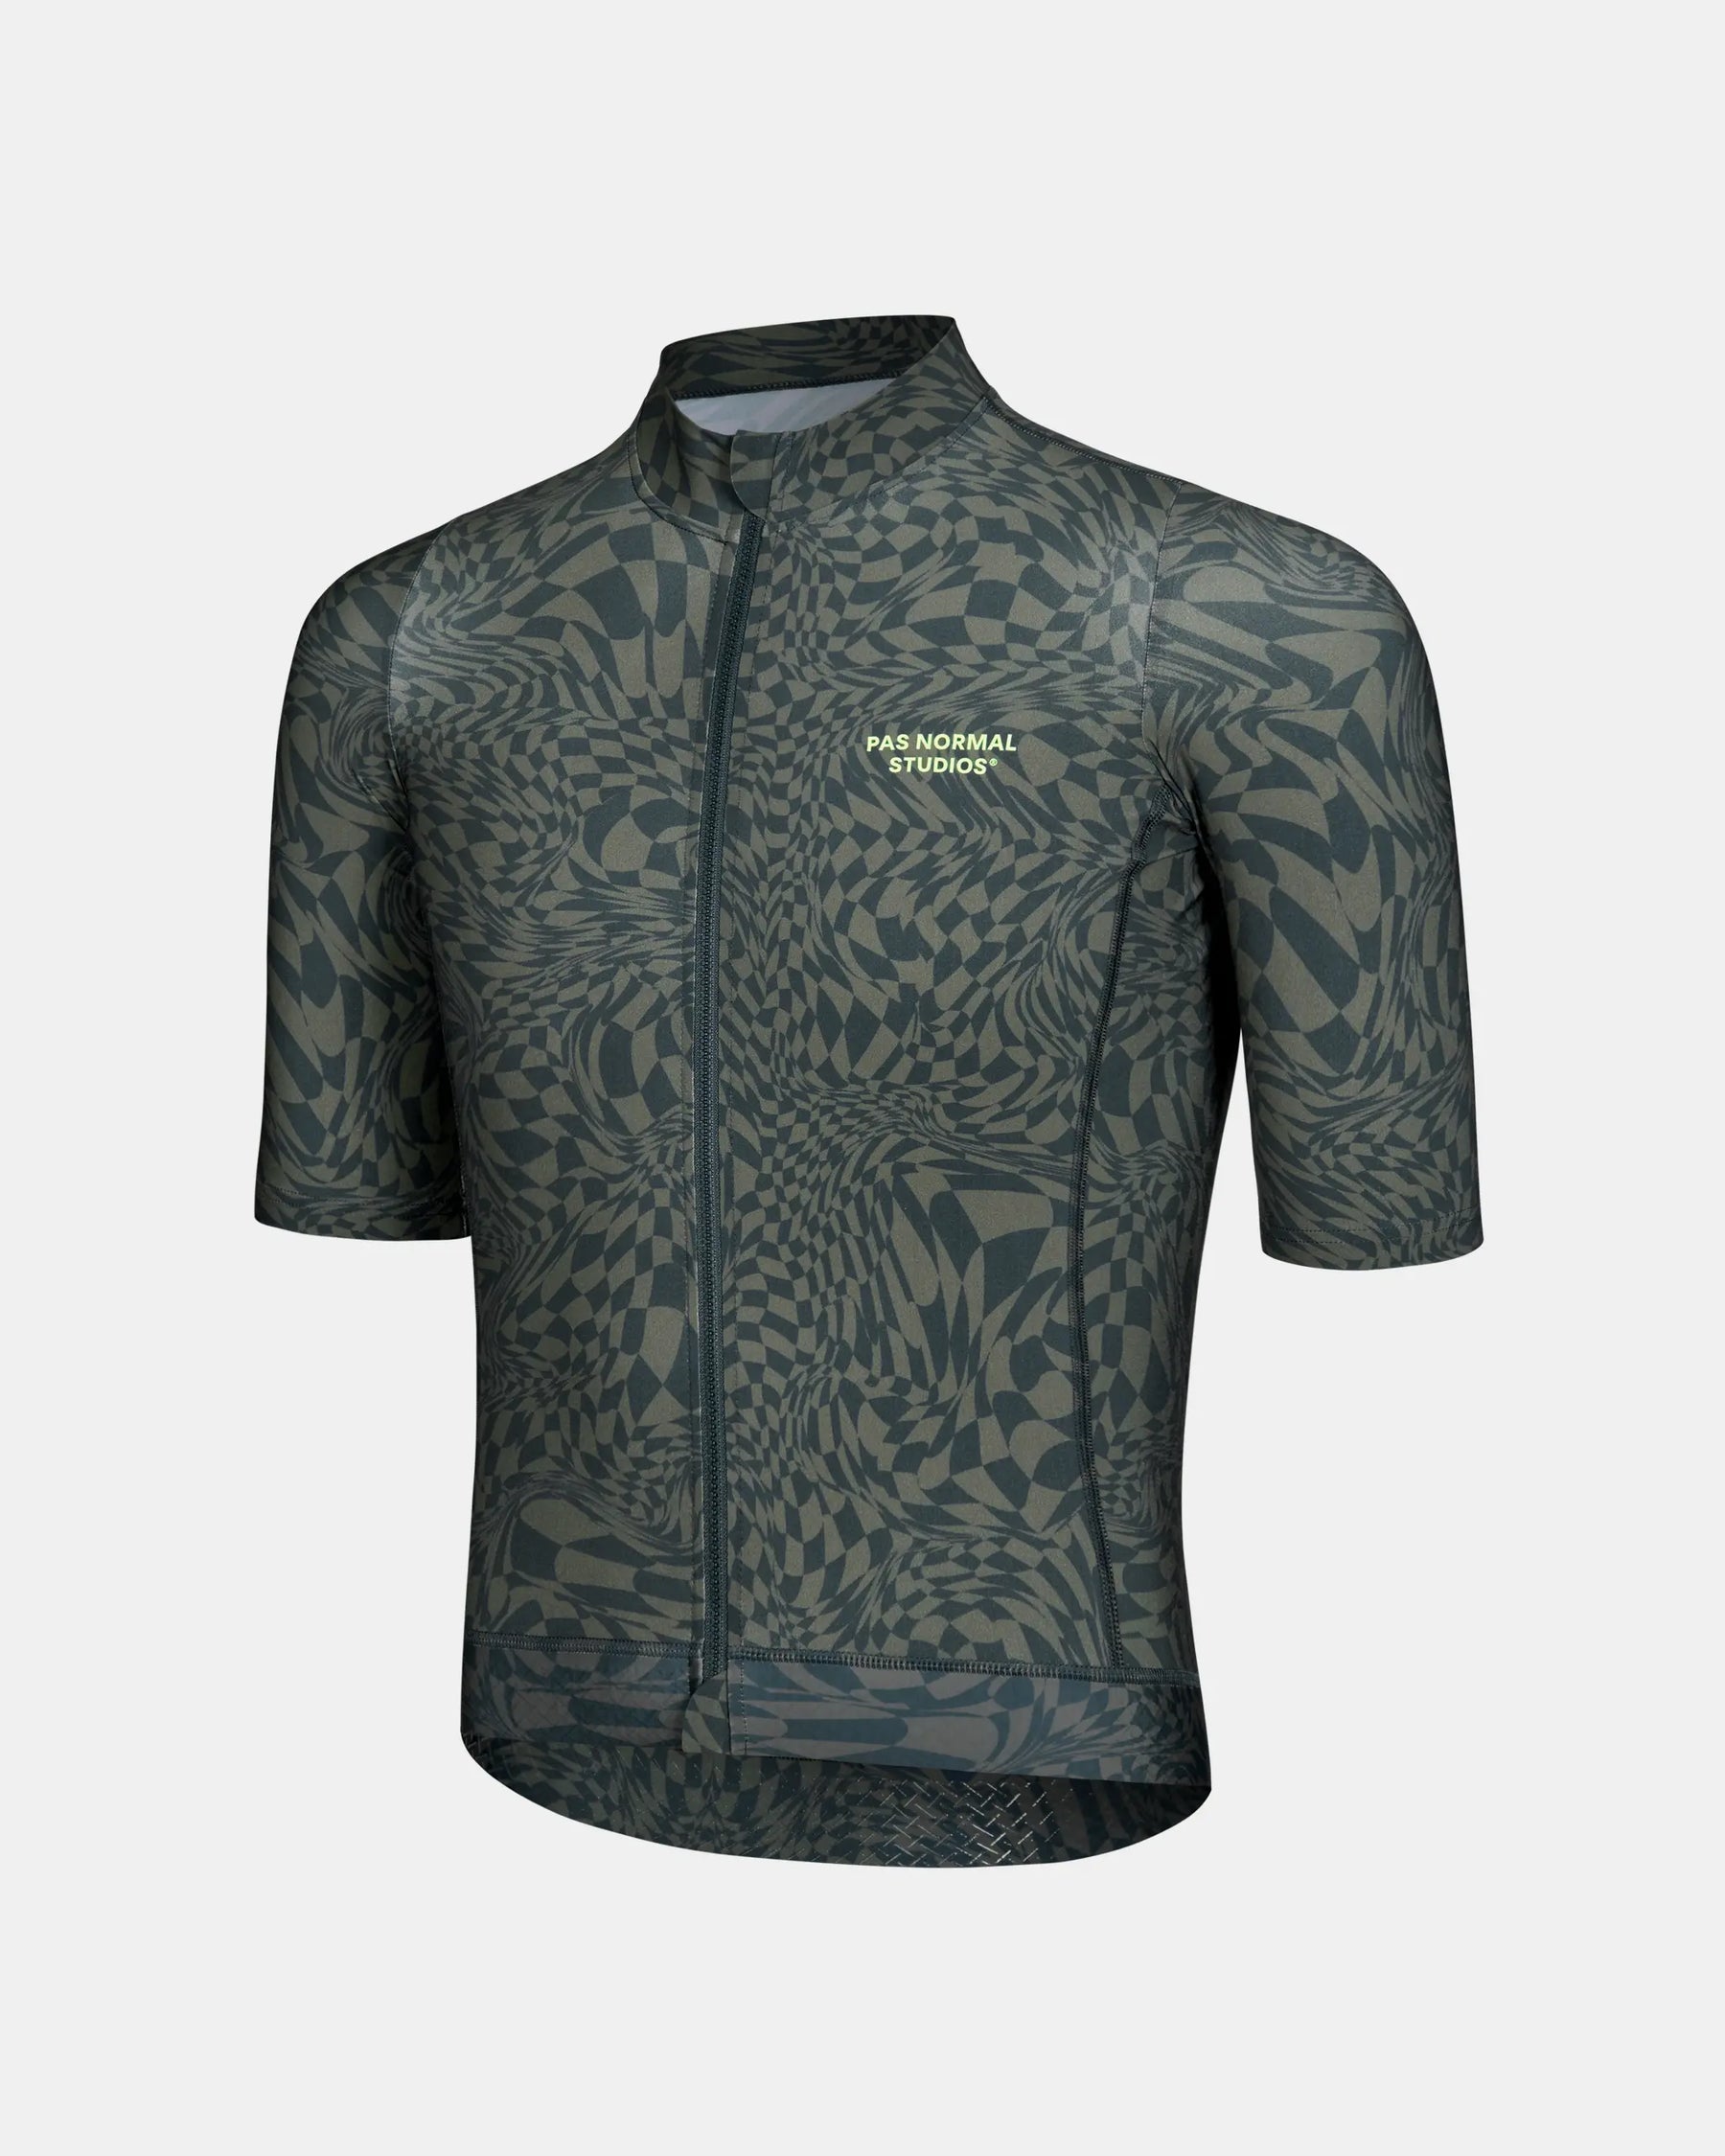 Men's Essential Jersey -  Check Olive Green